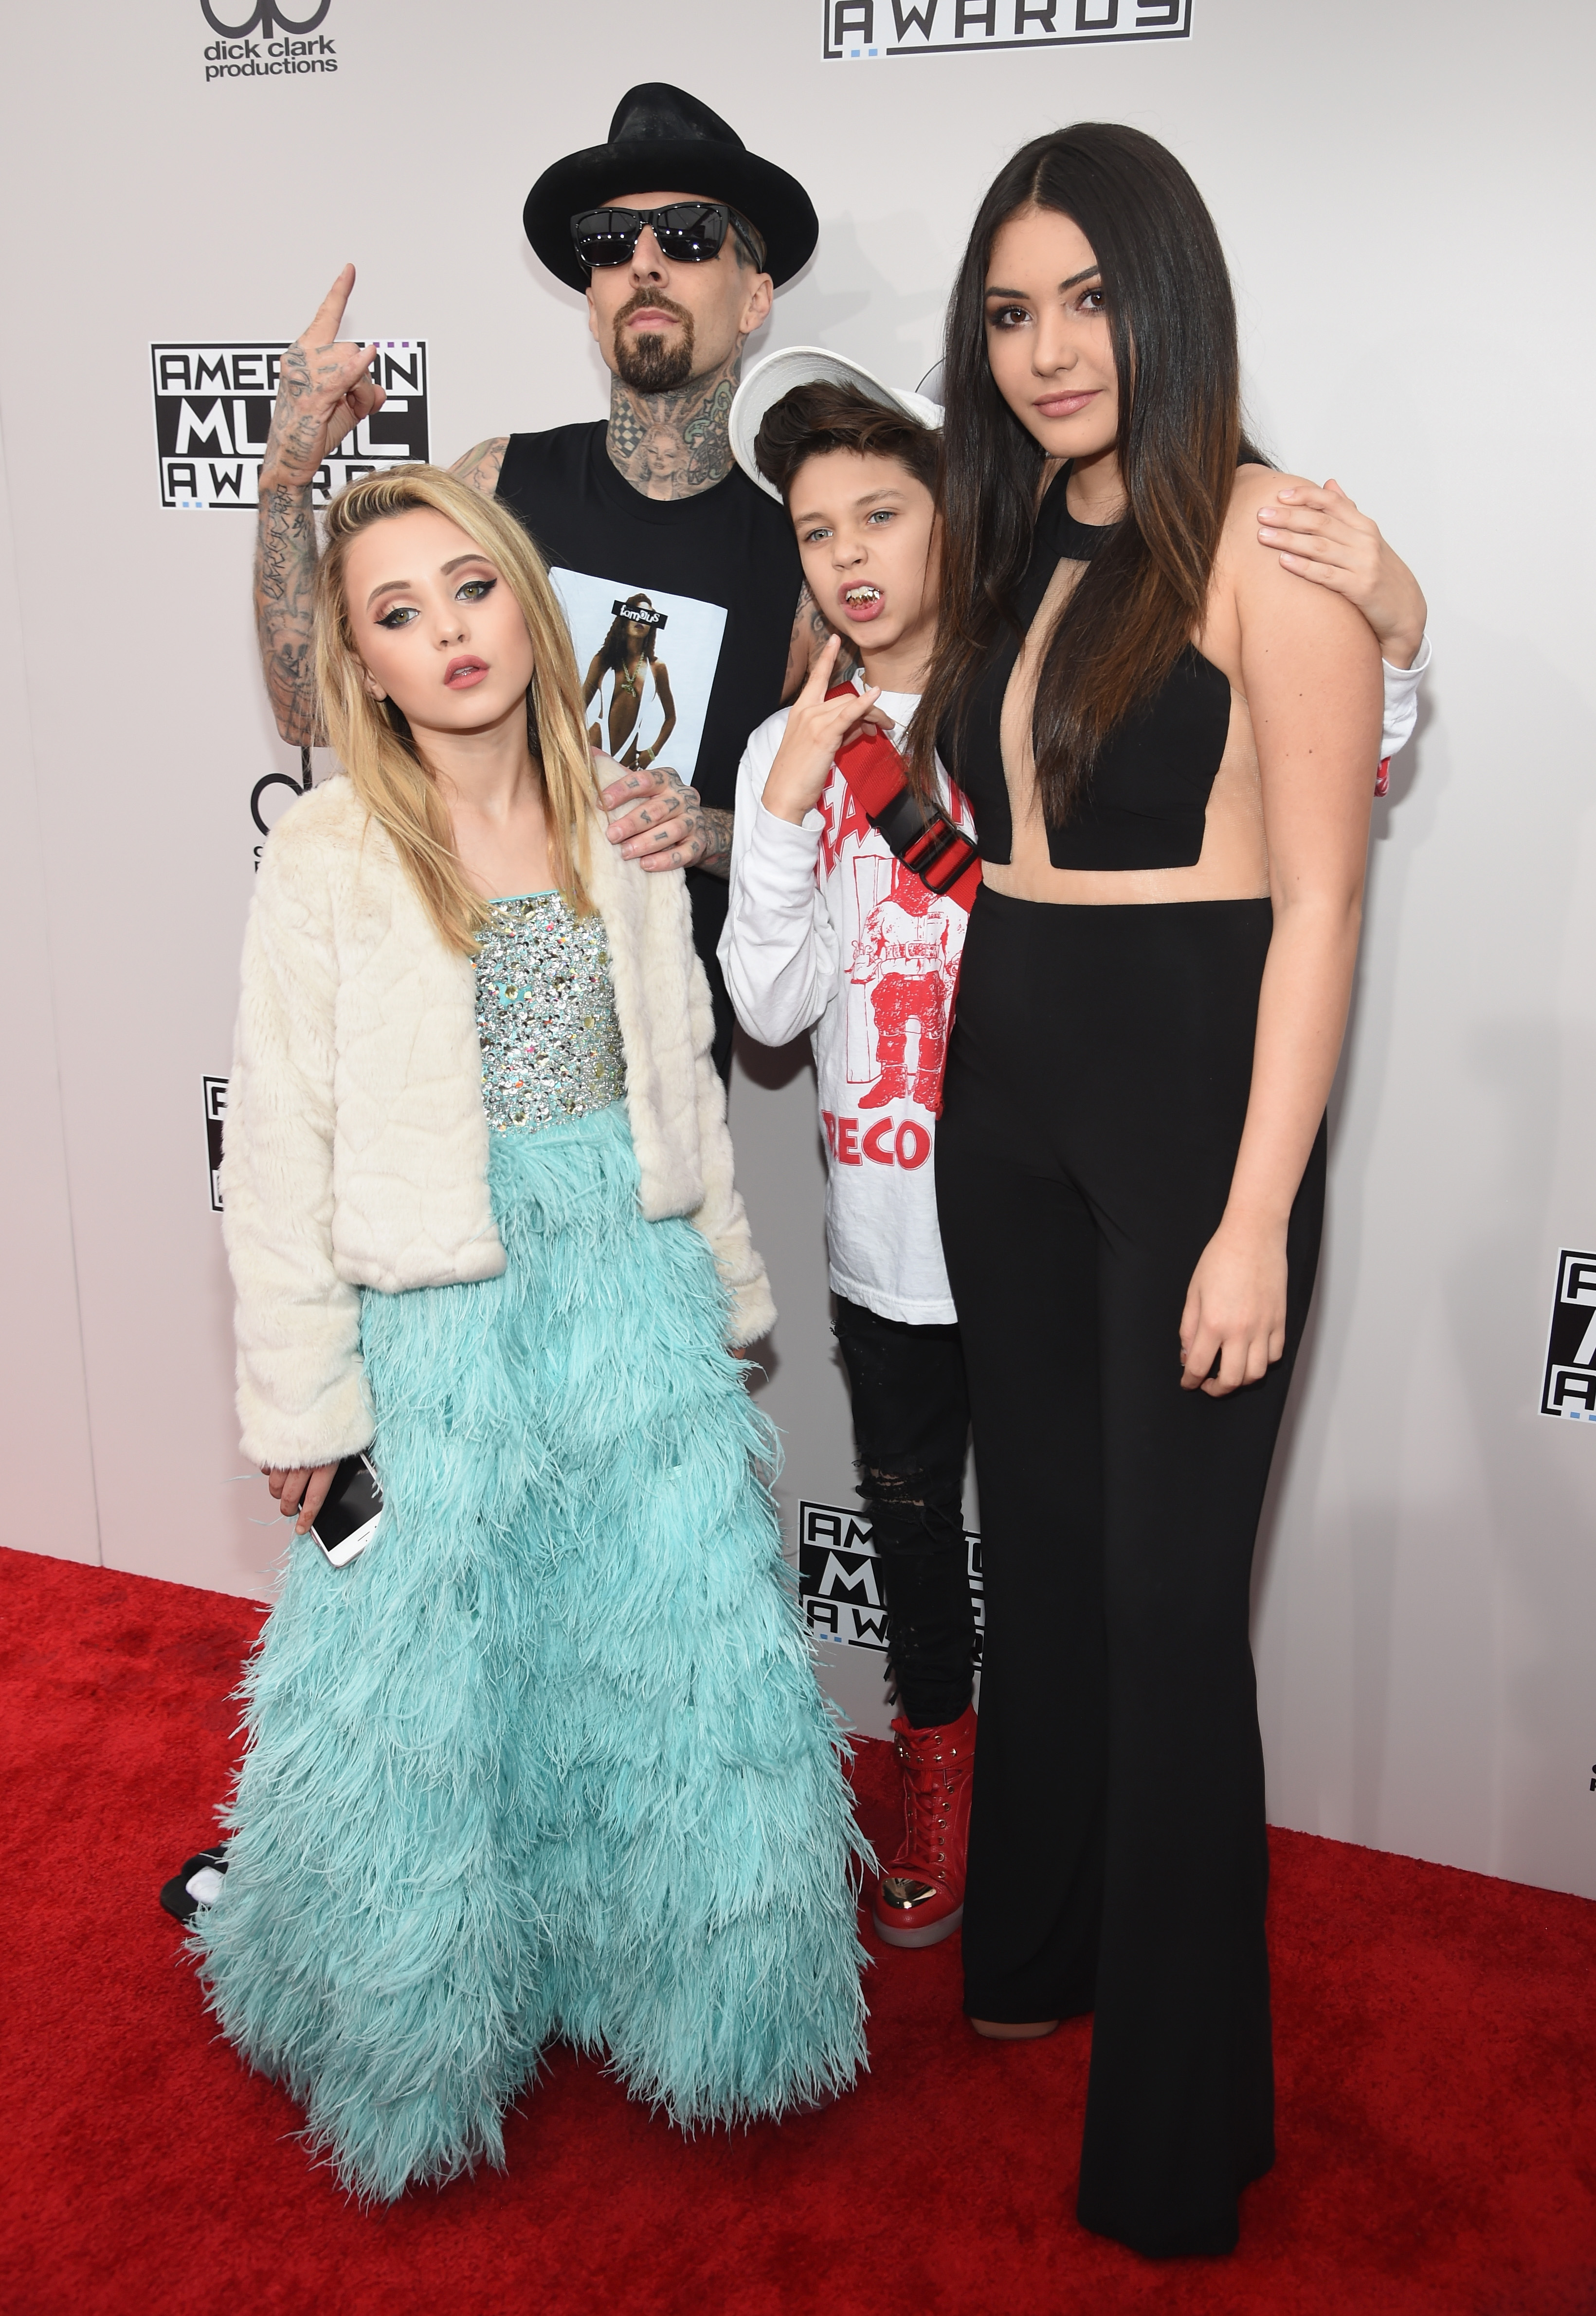 Alabama, Travis and Landon Barker and Atiana de la Hoy at the American Music Awards in Los Angeles, California on November 20, 2016 | Source: Getty Images